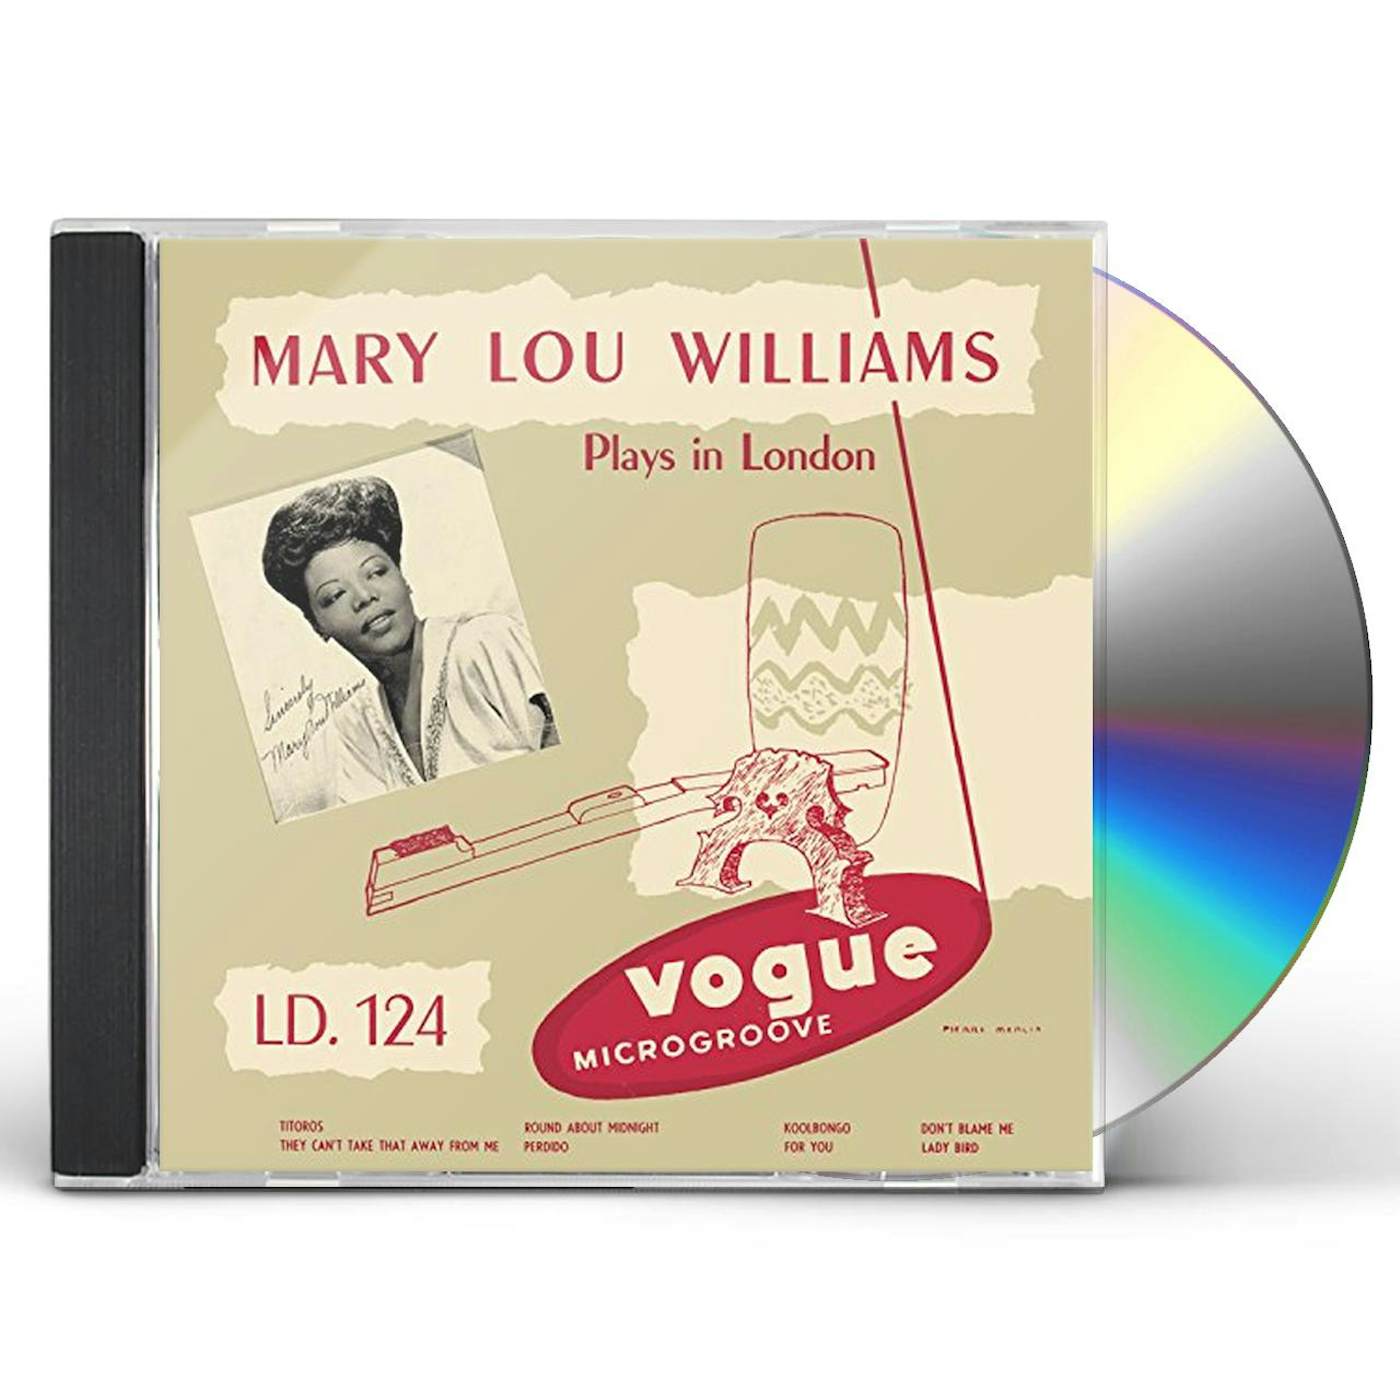 MARY LOU WILLIAMS PLAYS IN LONDON CD